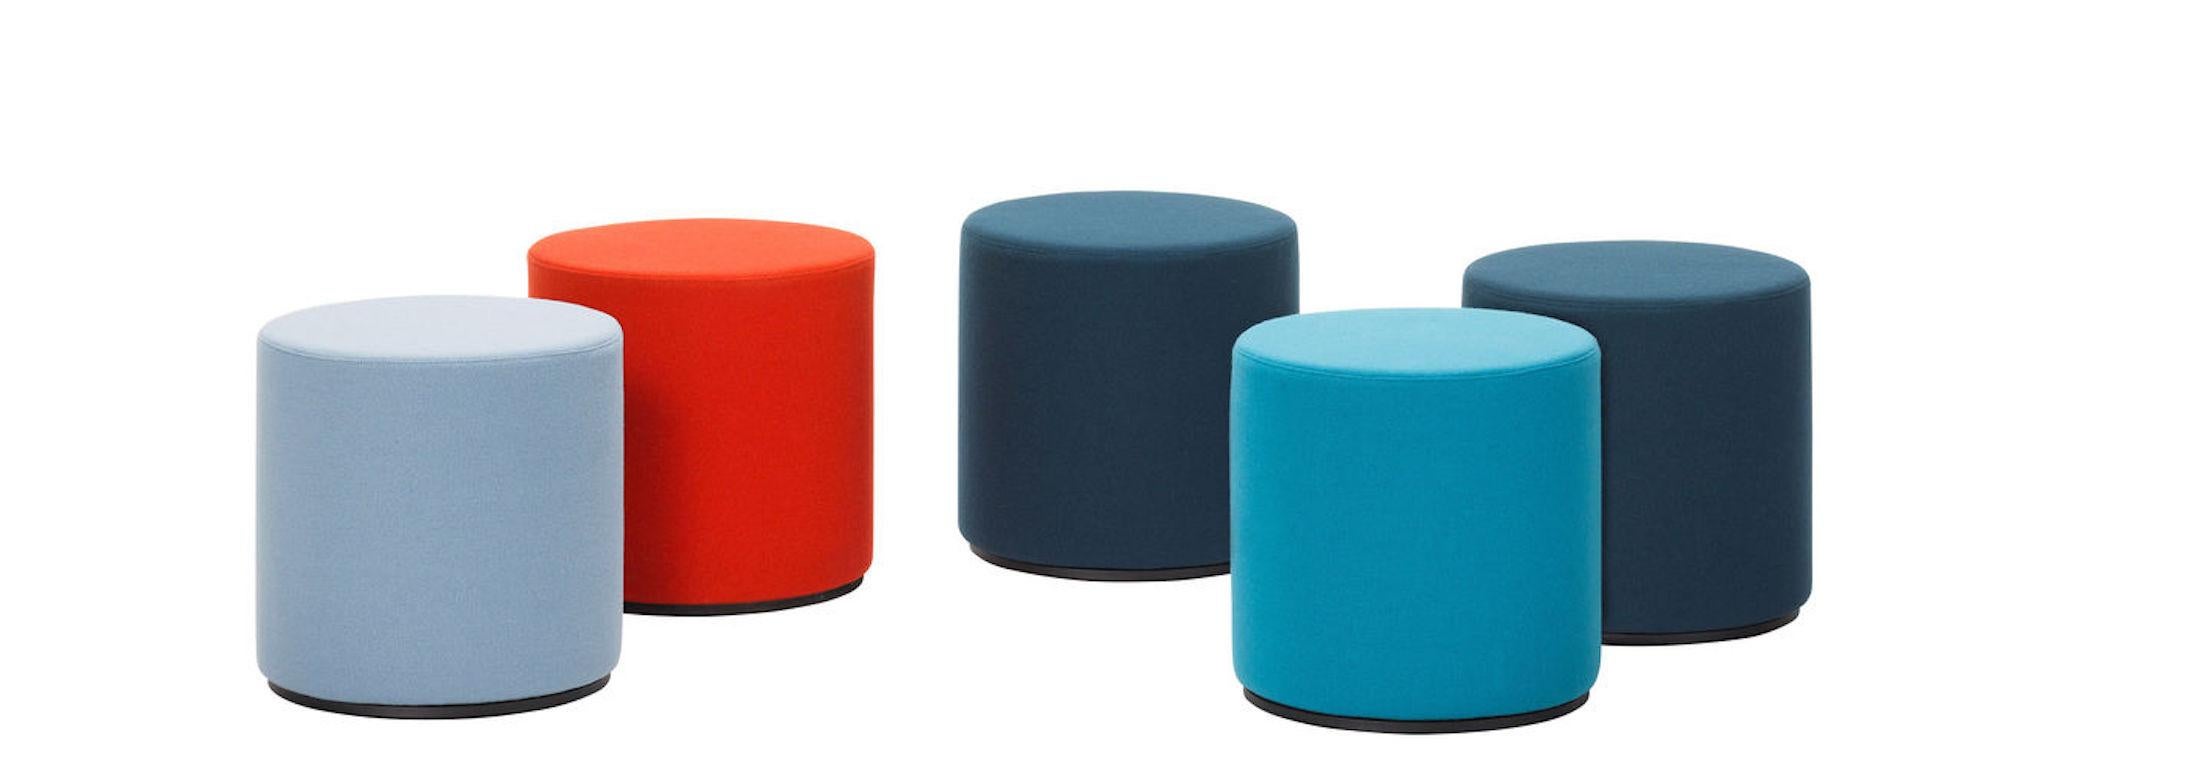 These items are currently only available in the United States.

Verner Panton designed the Visiona stool as part of the interior installation created in 1970 for his legendary Visiona exhibition in Cologne. The compact upholstered stool not only